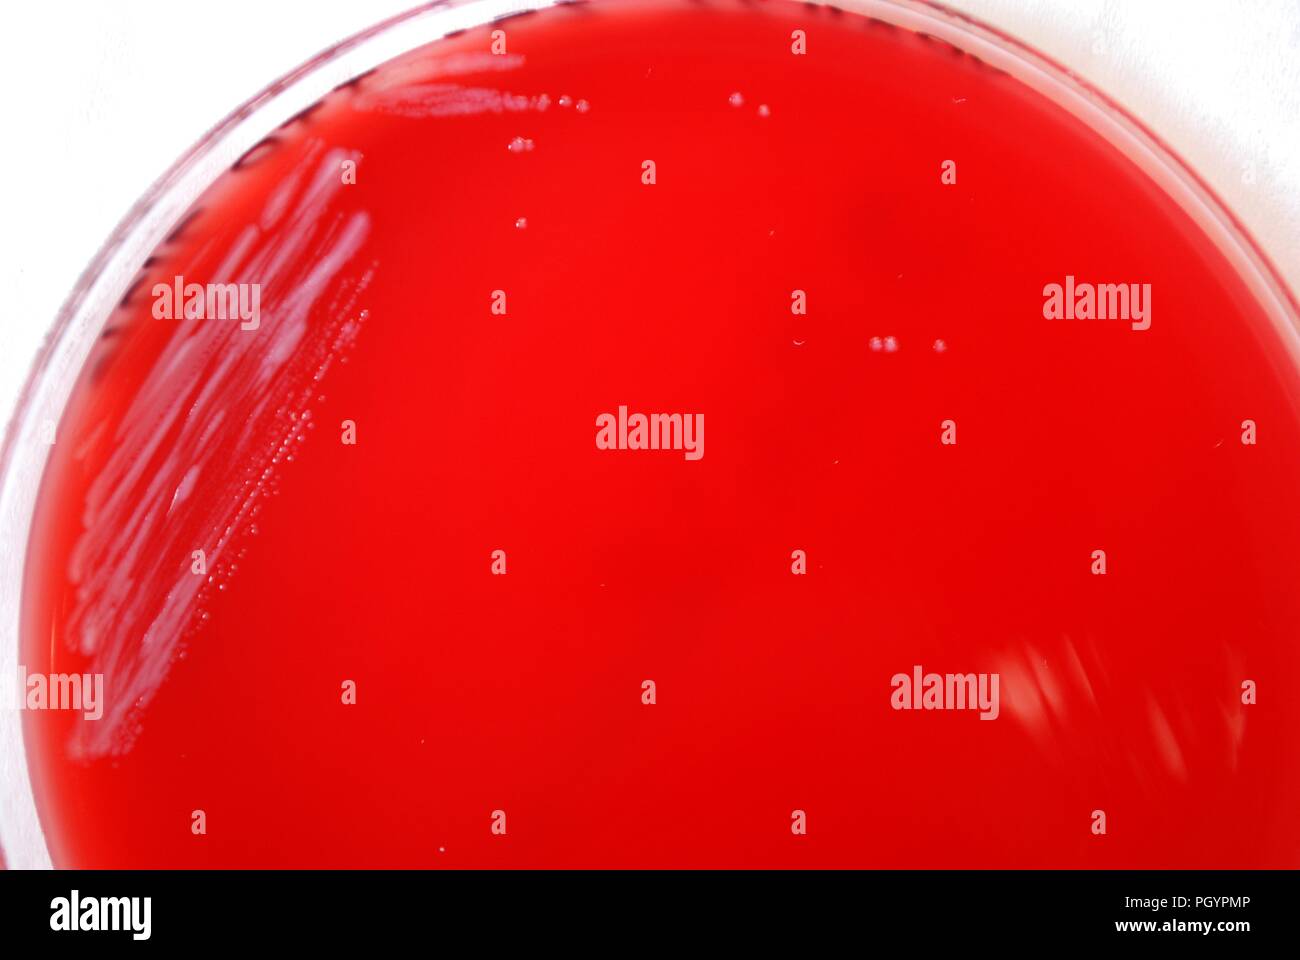 Colonial morphology of Gram-negative Yersinia pestis bacteria grown 48 hours on a medium of sheep's blood agar (SBA), 2010. Image courtesy Centers for Disease Control (CDC) / Dr Todd Parker, Audra Marsh. () Stock Photo